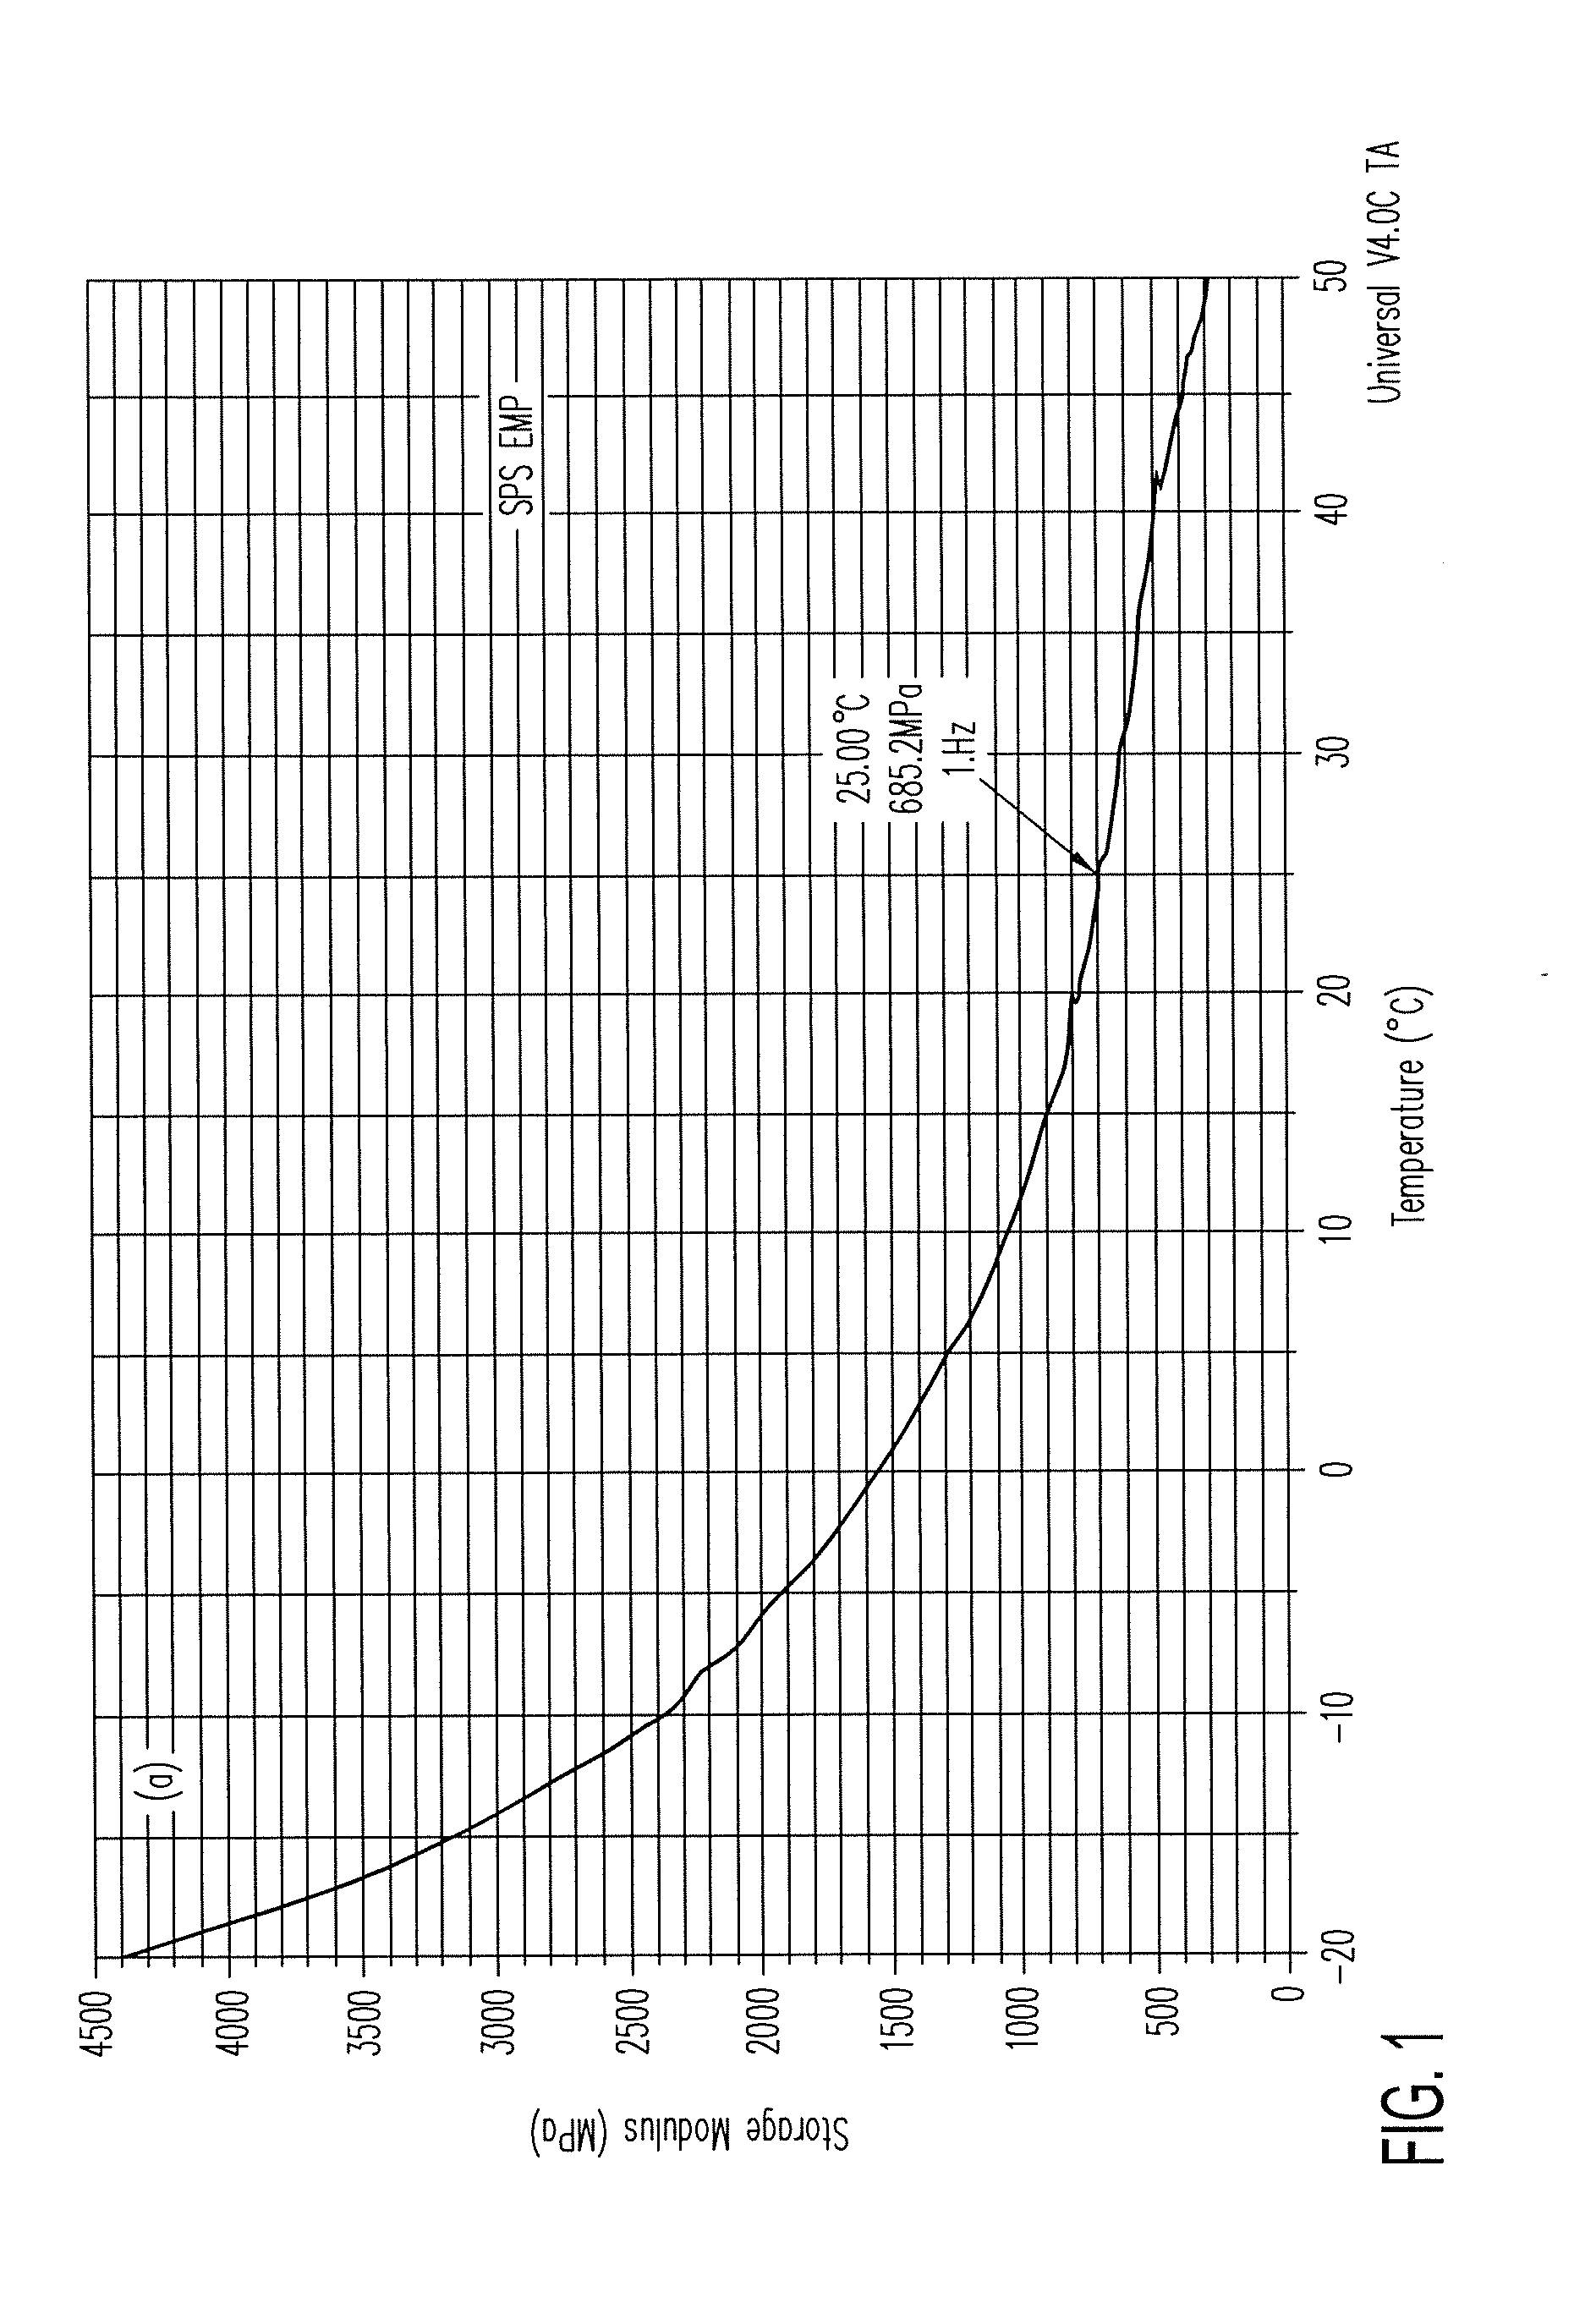 Systems including electromechanical polymer sensors and actuators